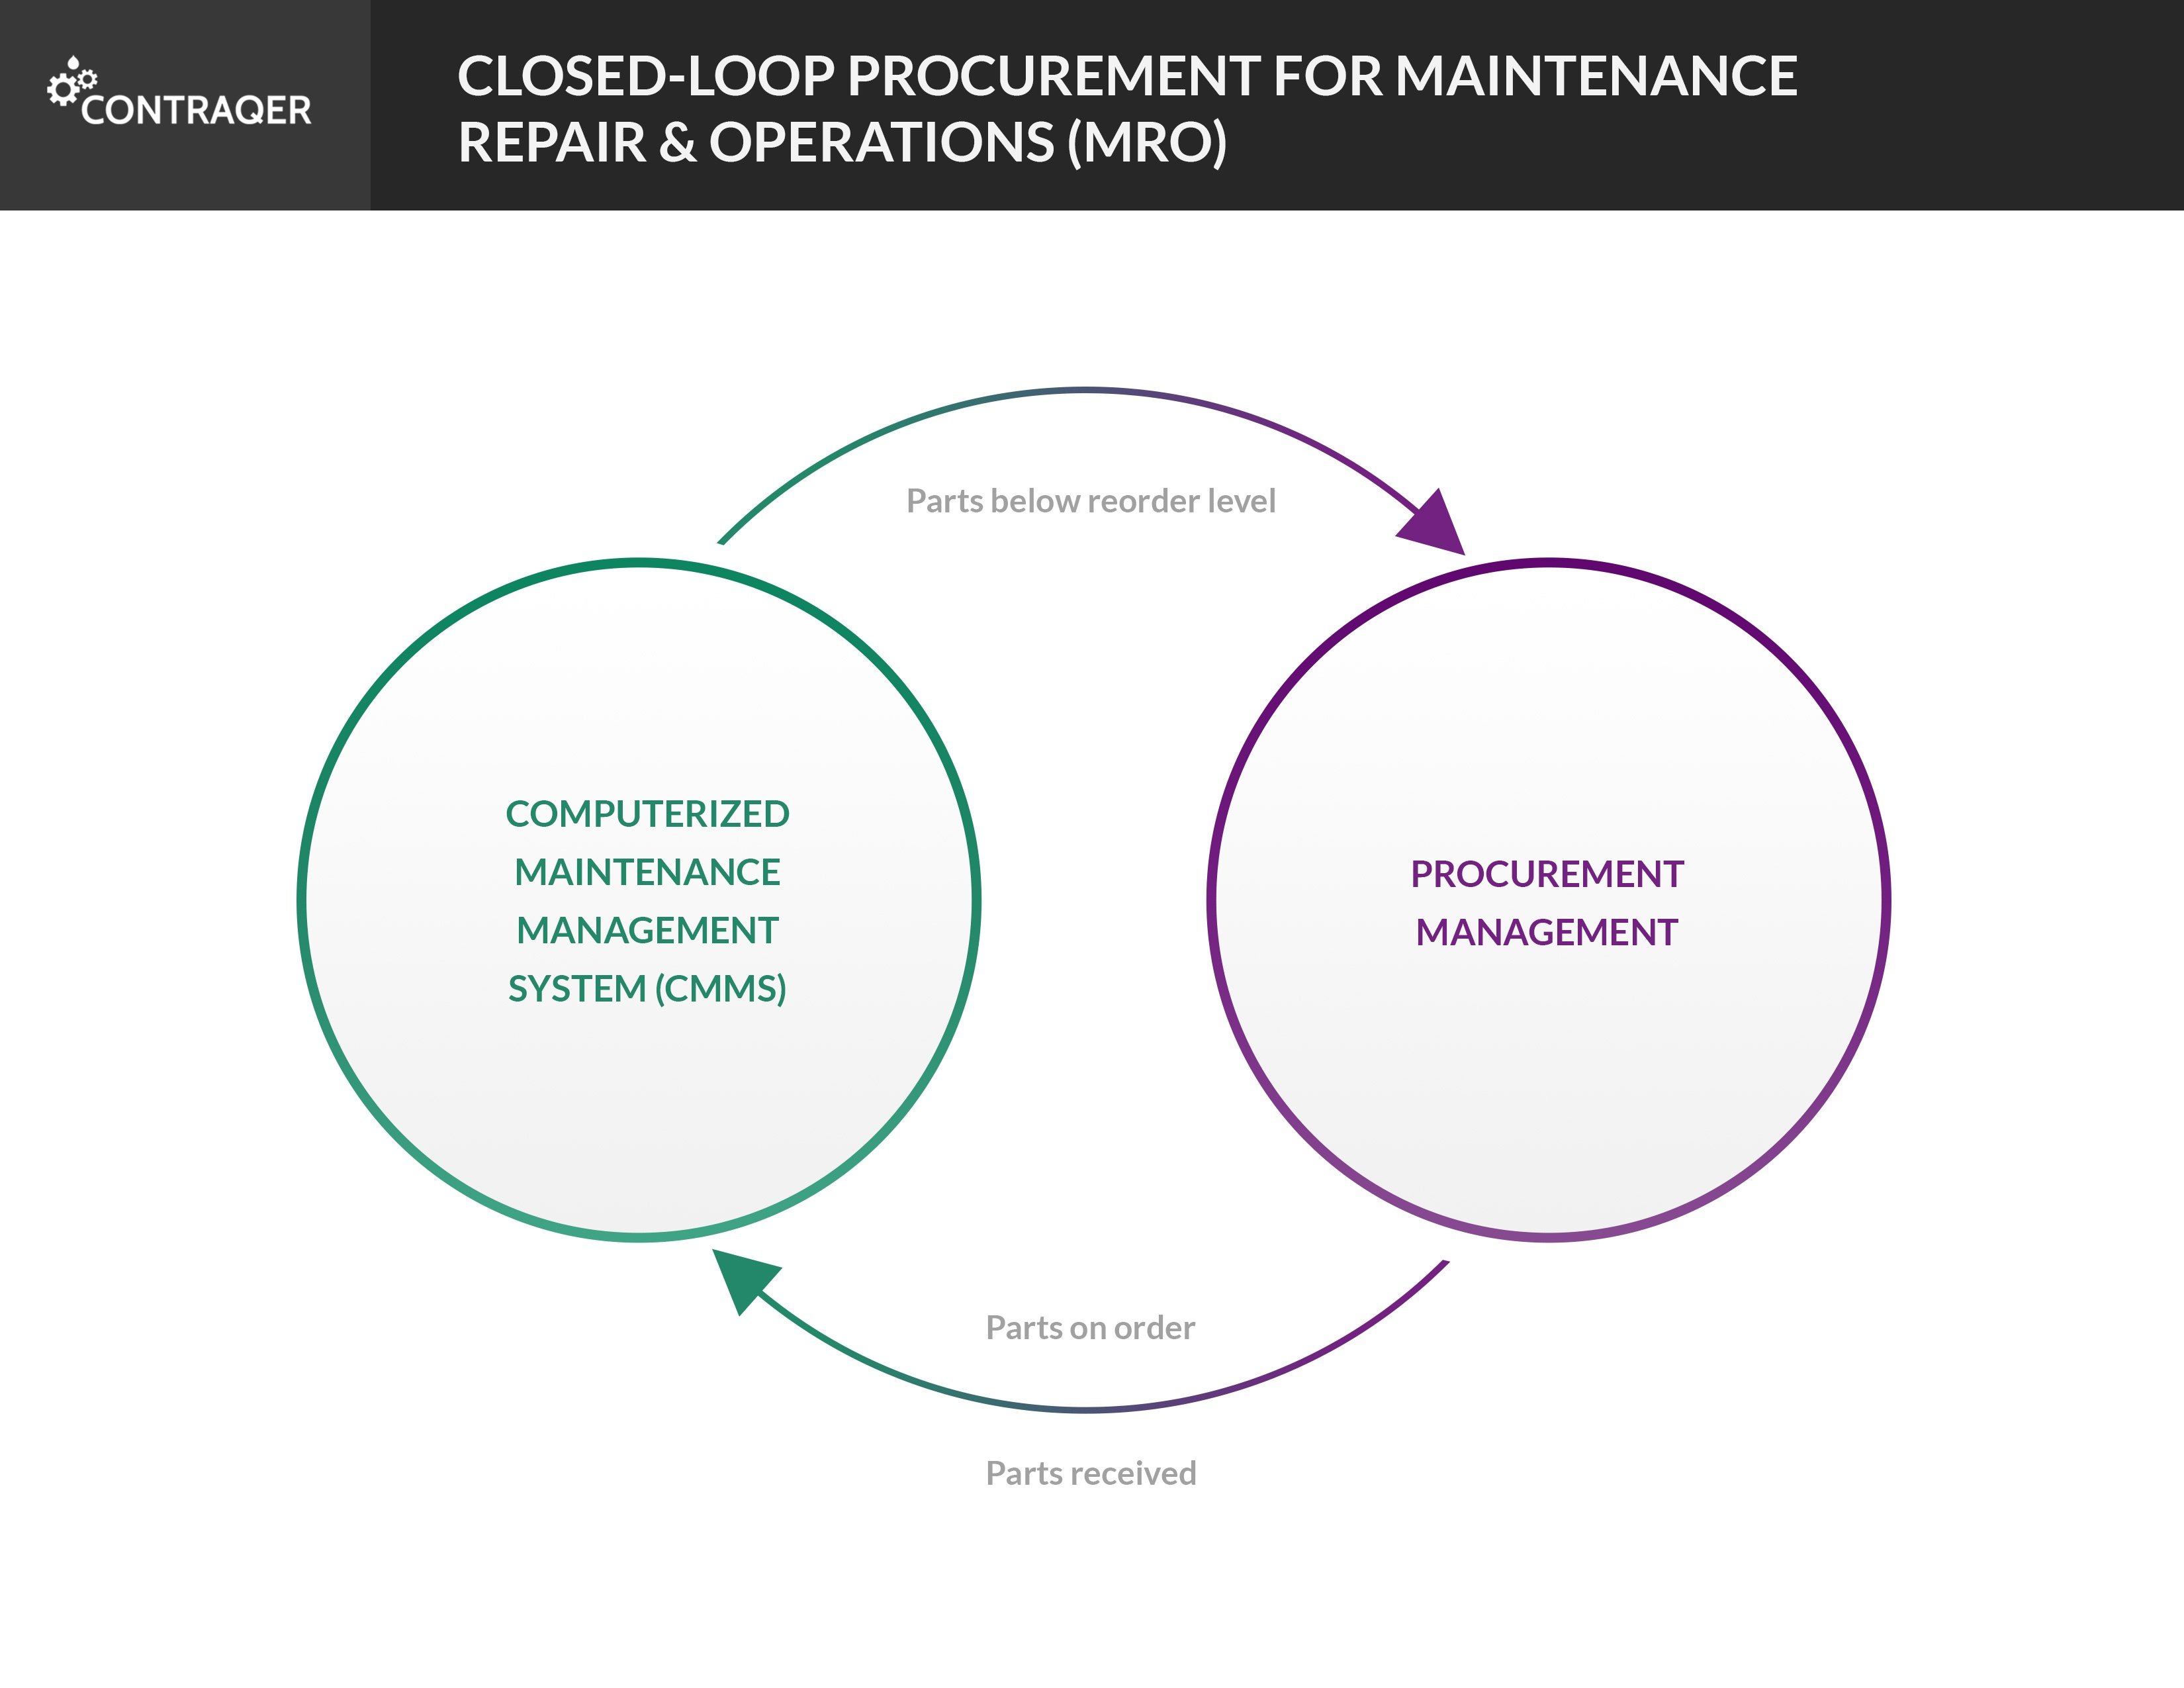 Learn How Closed-Loop MRO Procurement Saves Time & Improves Uptime